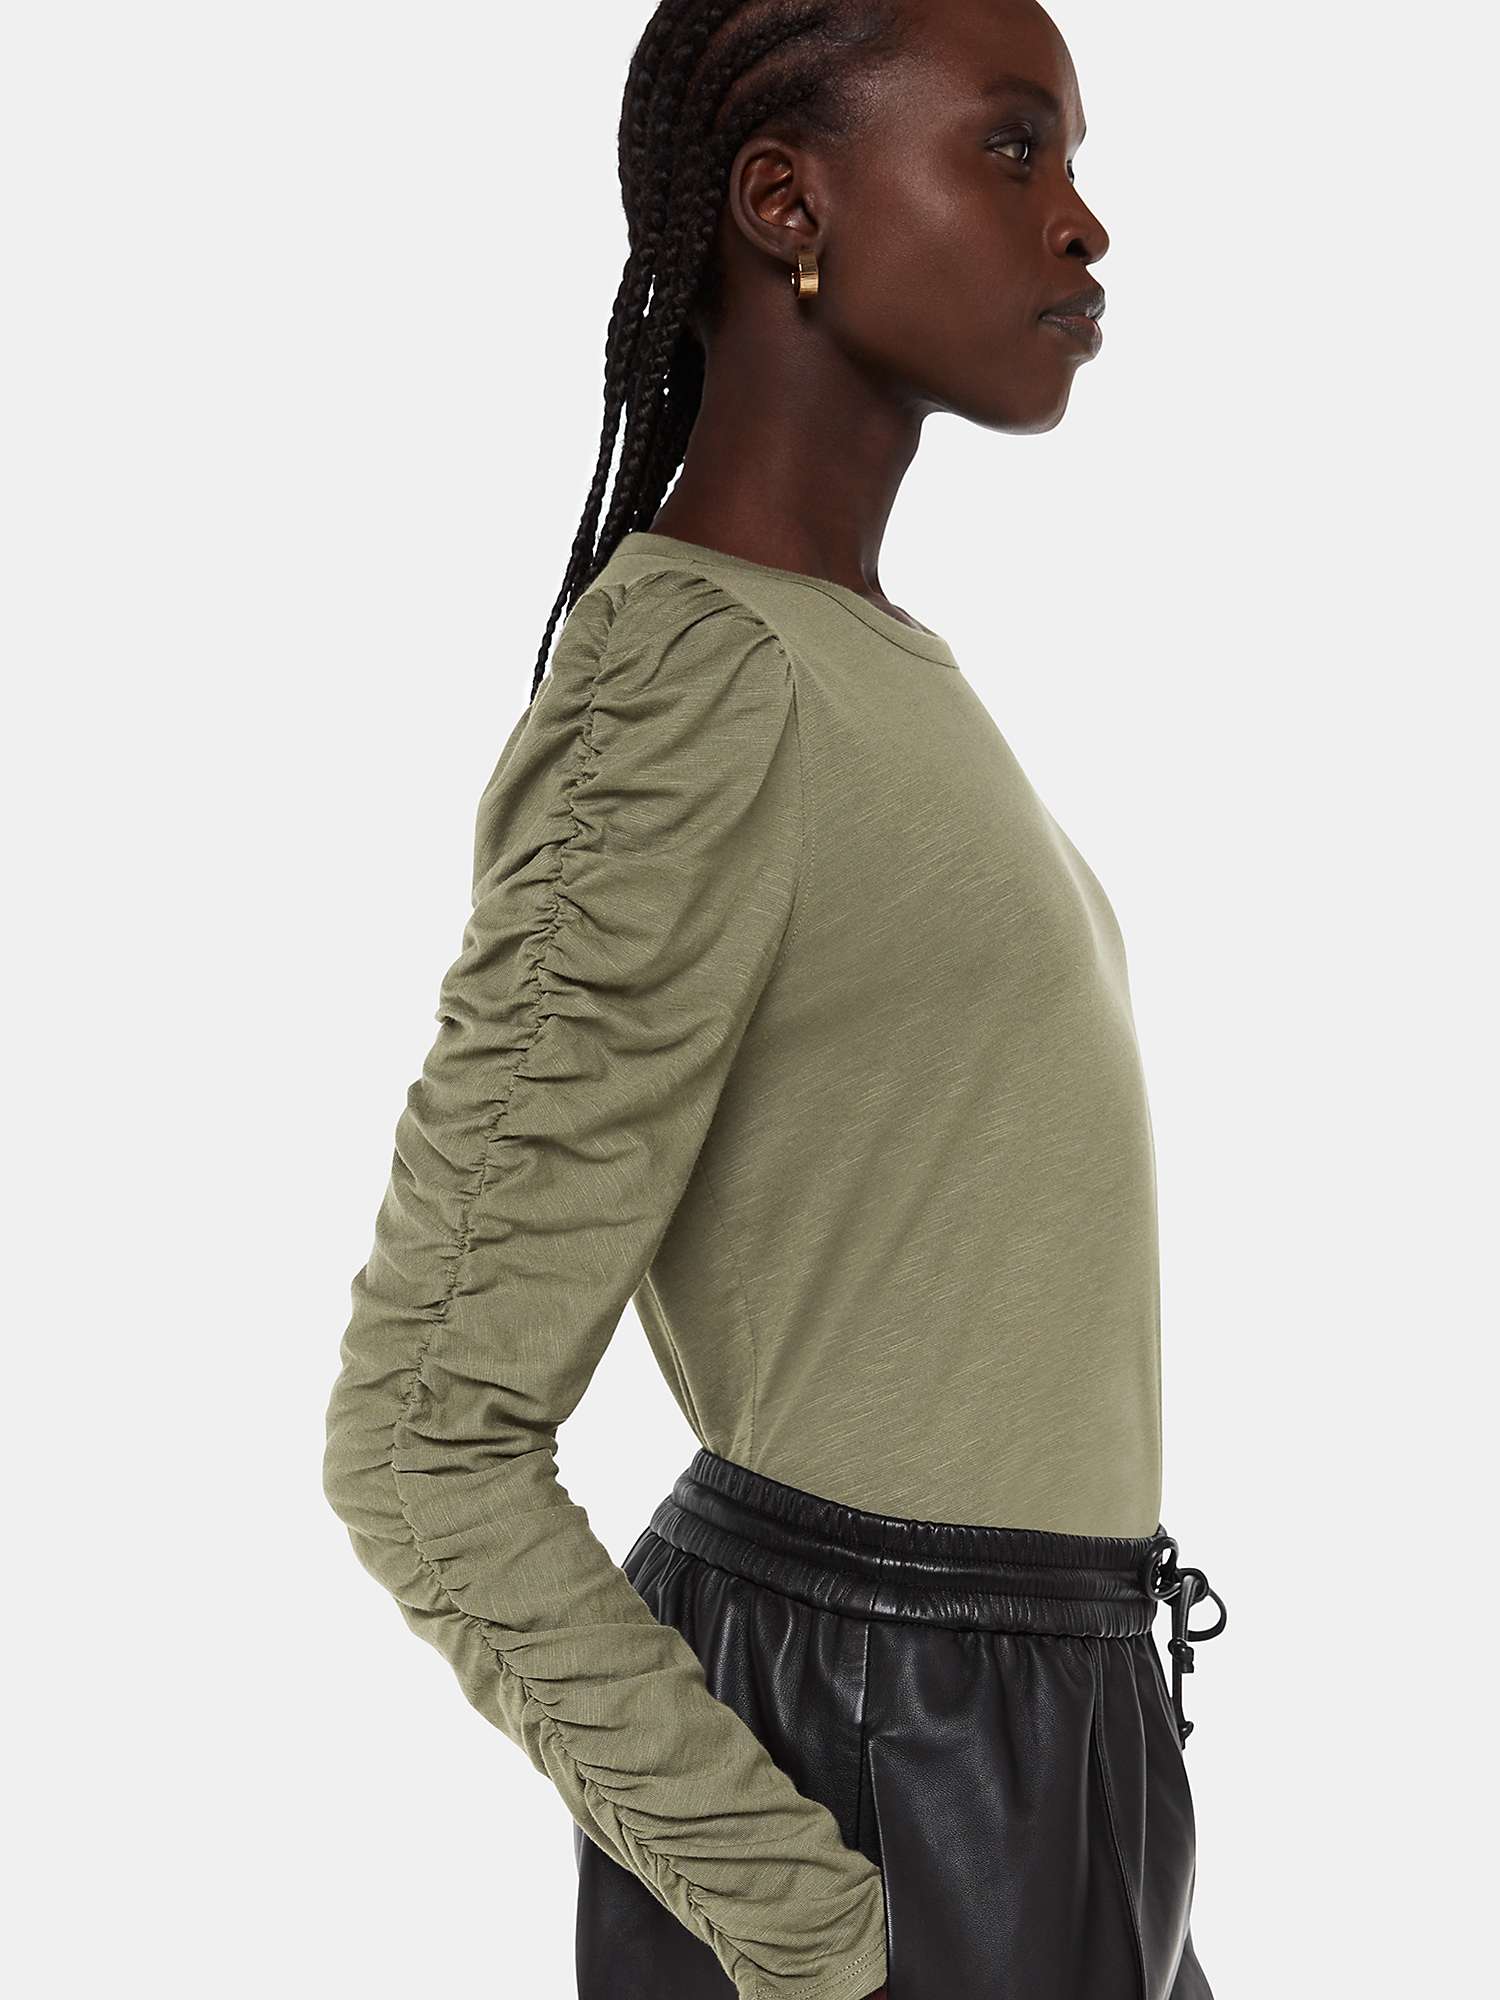 Buy Whistles Ruched Sleeve Top, Khaki Online at johnlewis.com